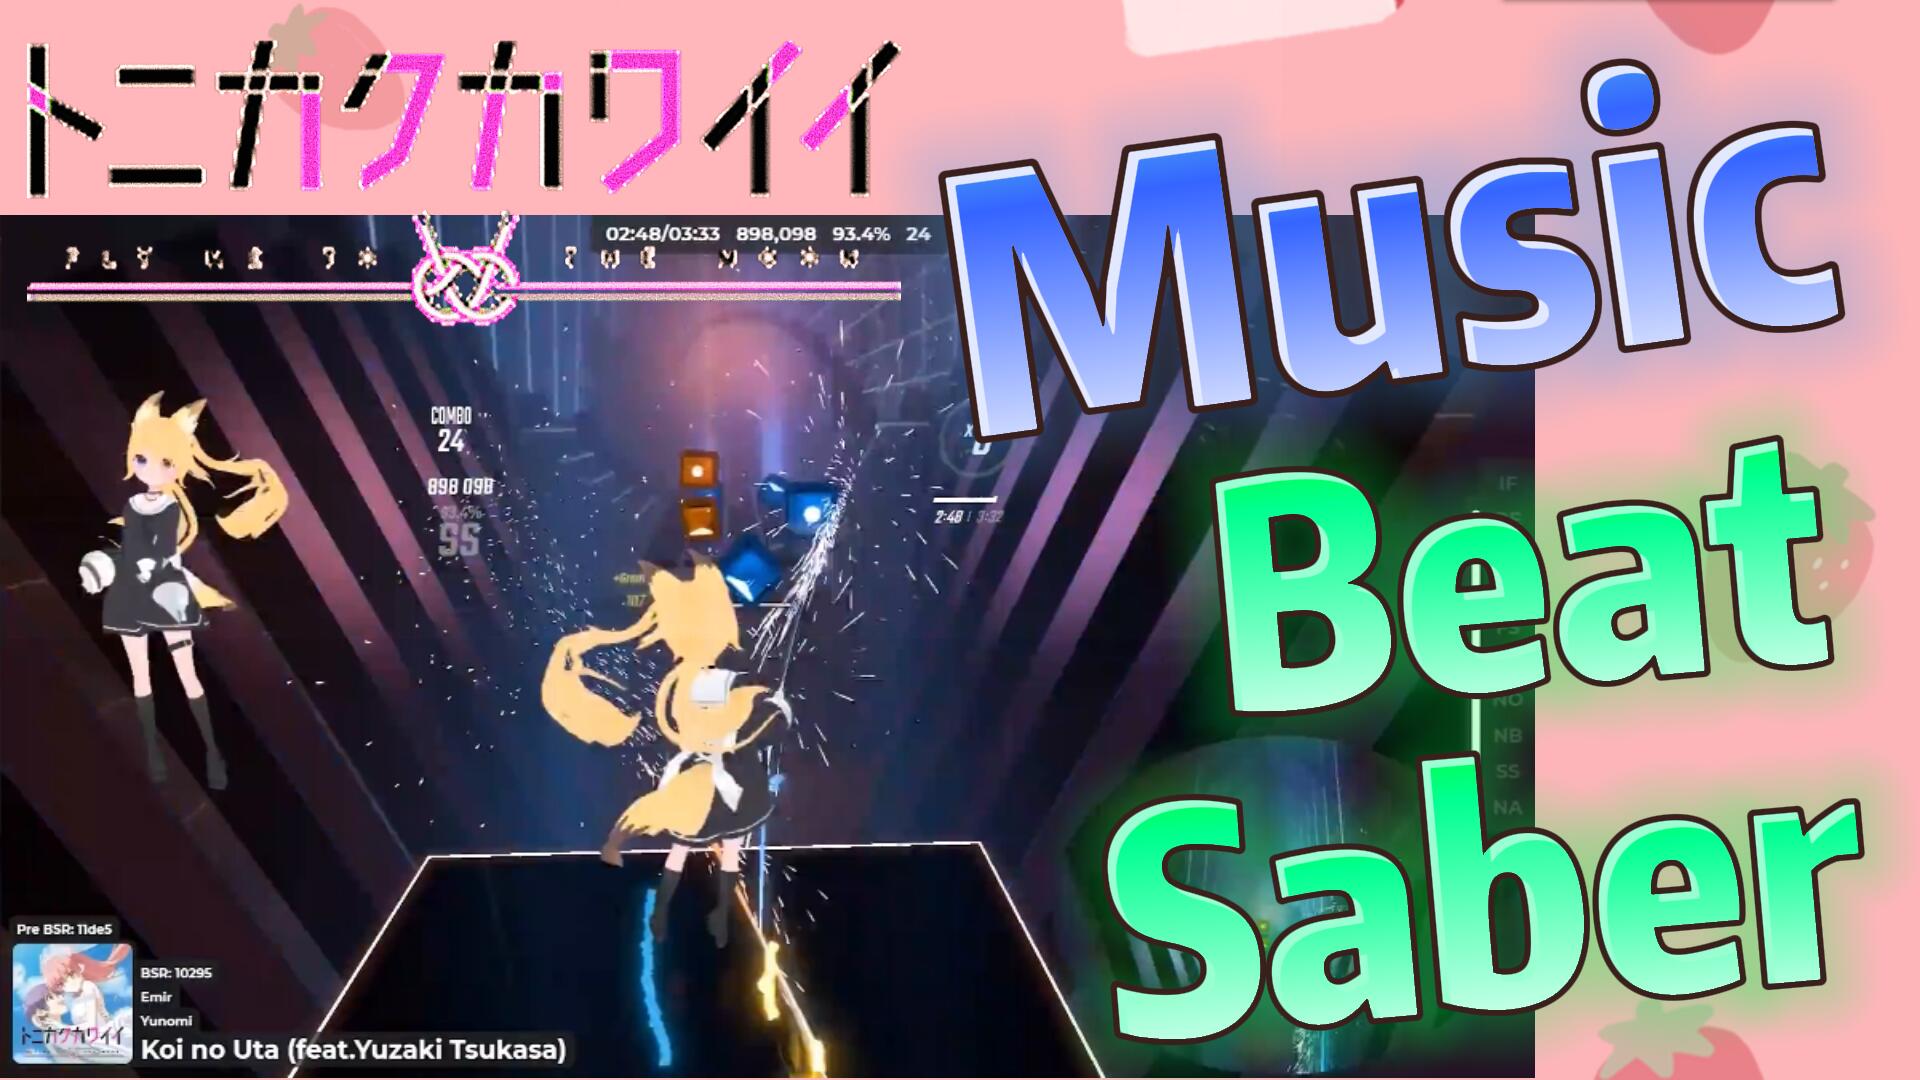 Fly to the Music Beat - Bilibili